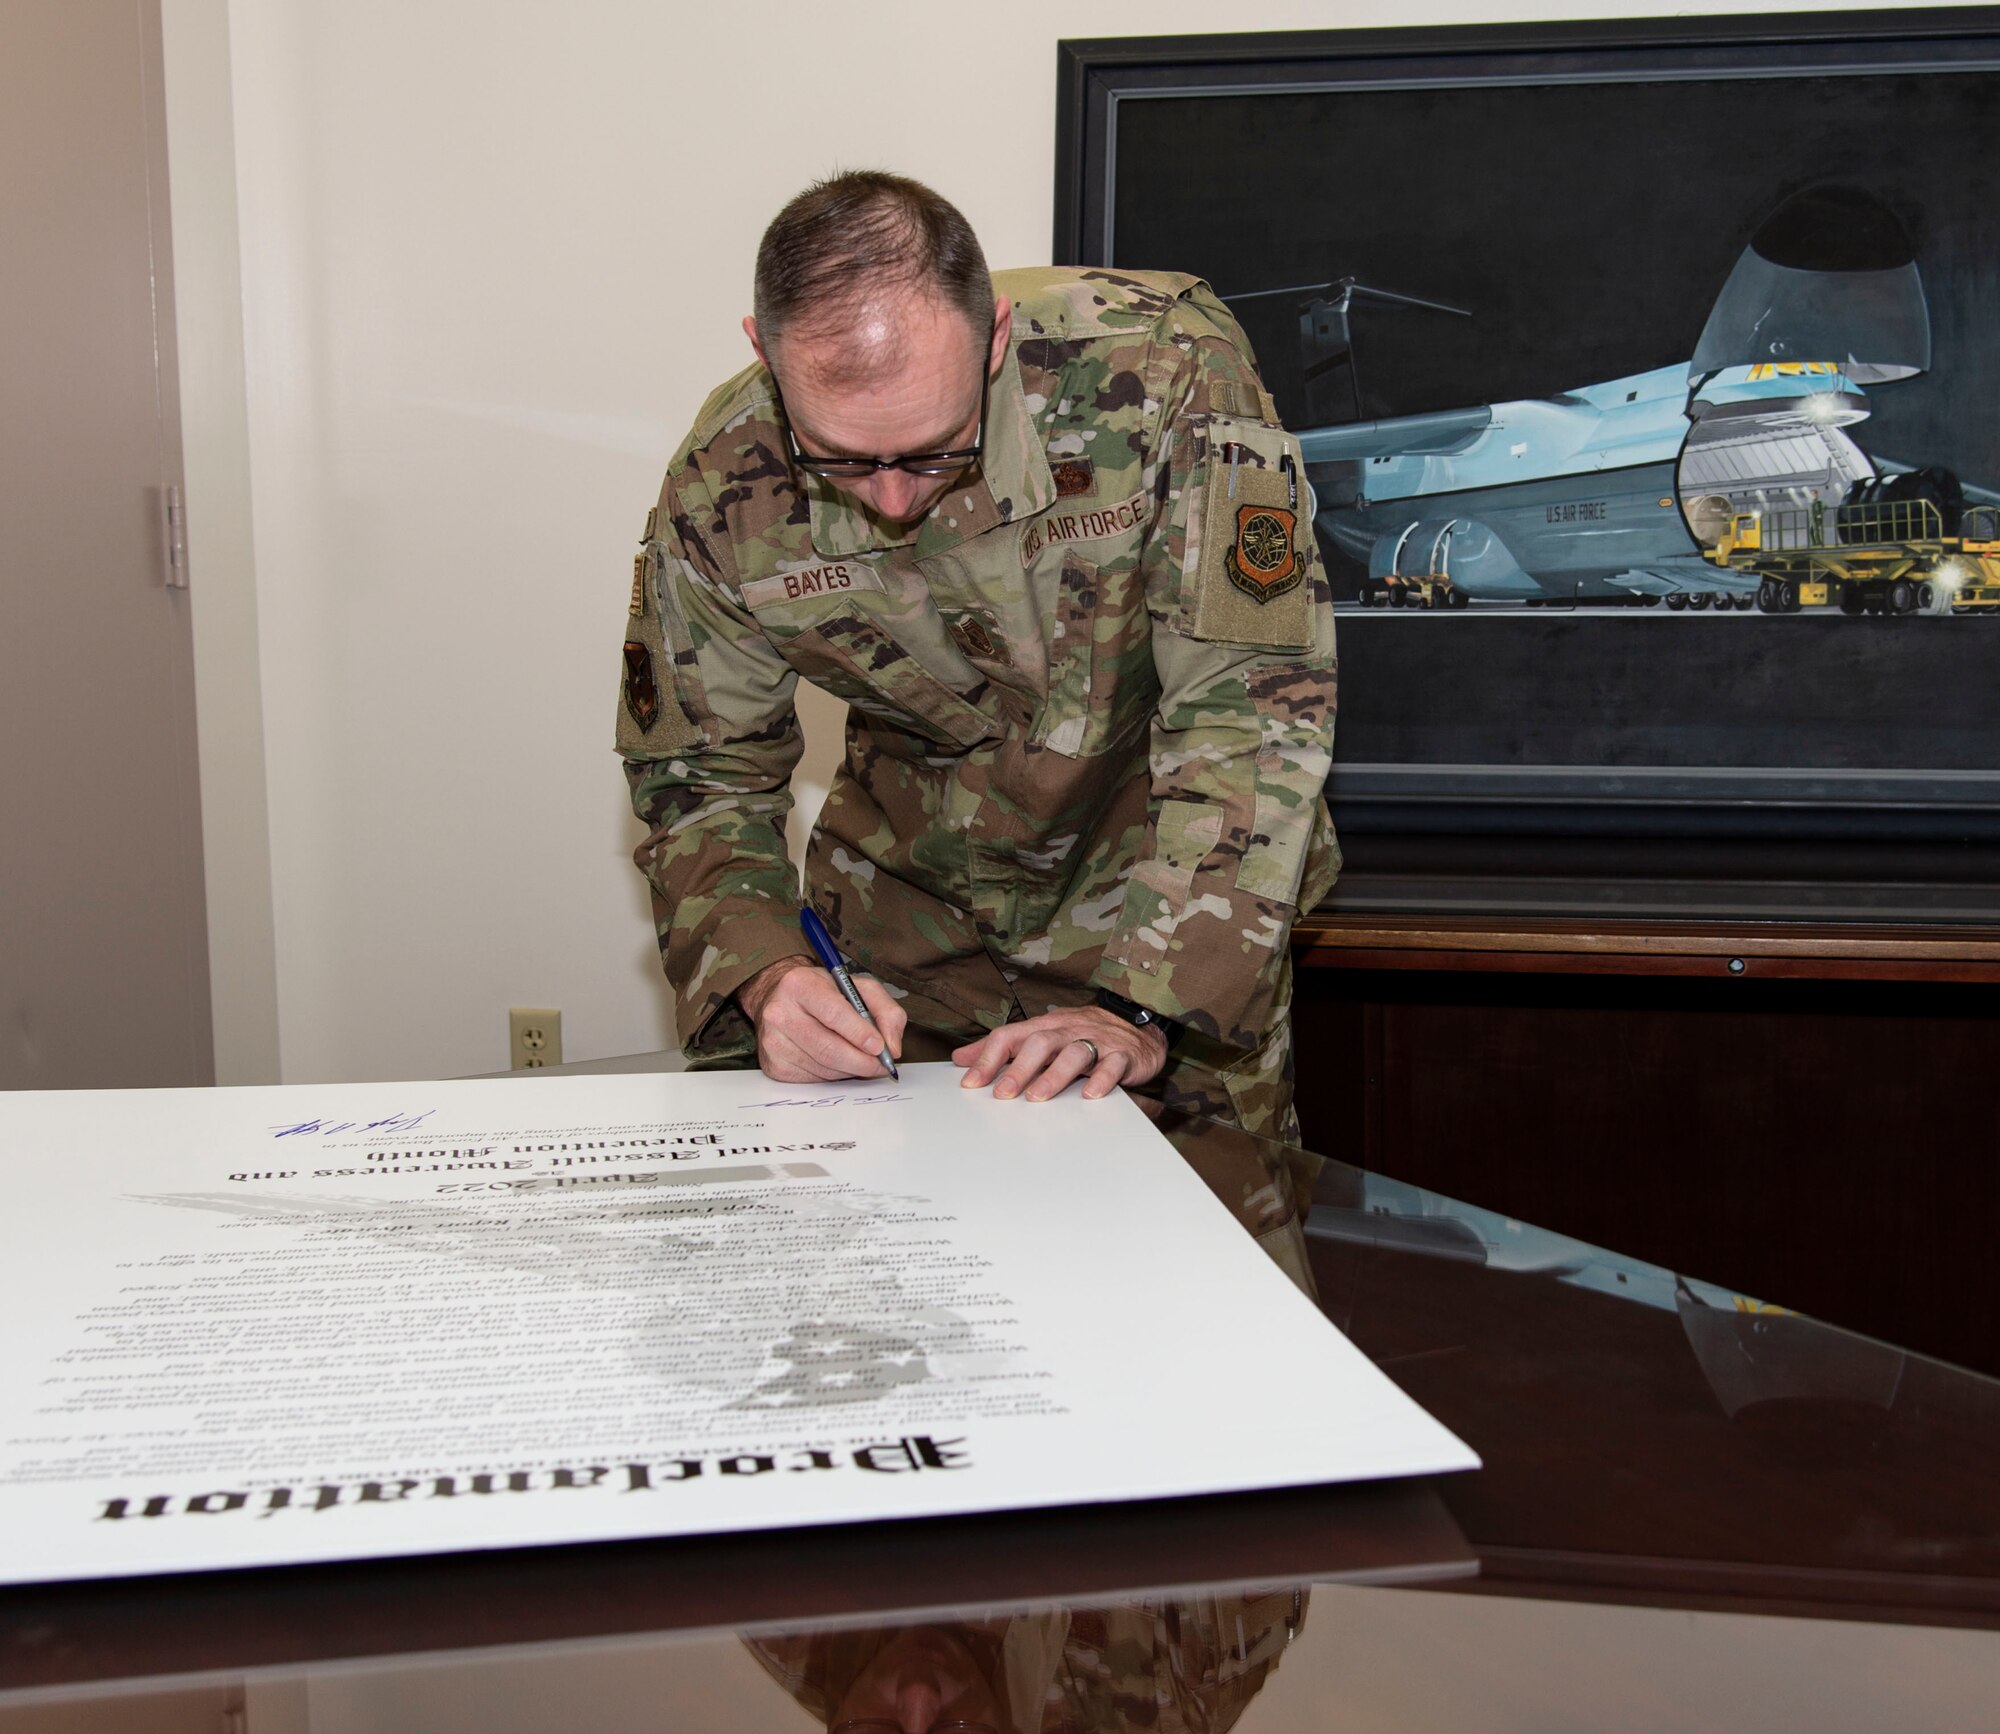 Chief Master Sgt. Timothy Bayes, 436th Airlift Wing command chief, signs the Sexual Assault Awareness Month proclamation at Dover Air Force Base, Delaware, March 14, 2022. Bayes, along with other Dover AFB senior leaders, signed the proclamation to support SAAM in April. (U.S. Air Force photo by Roland Balik)